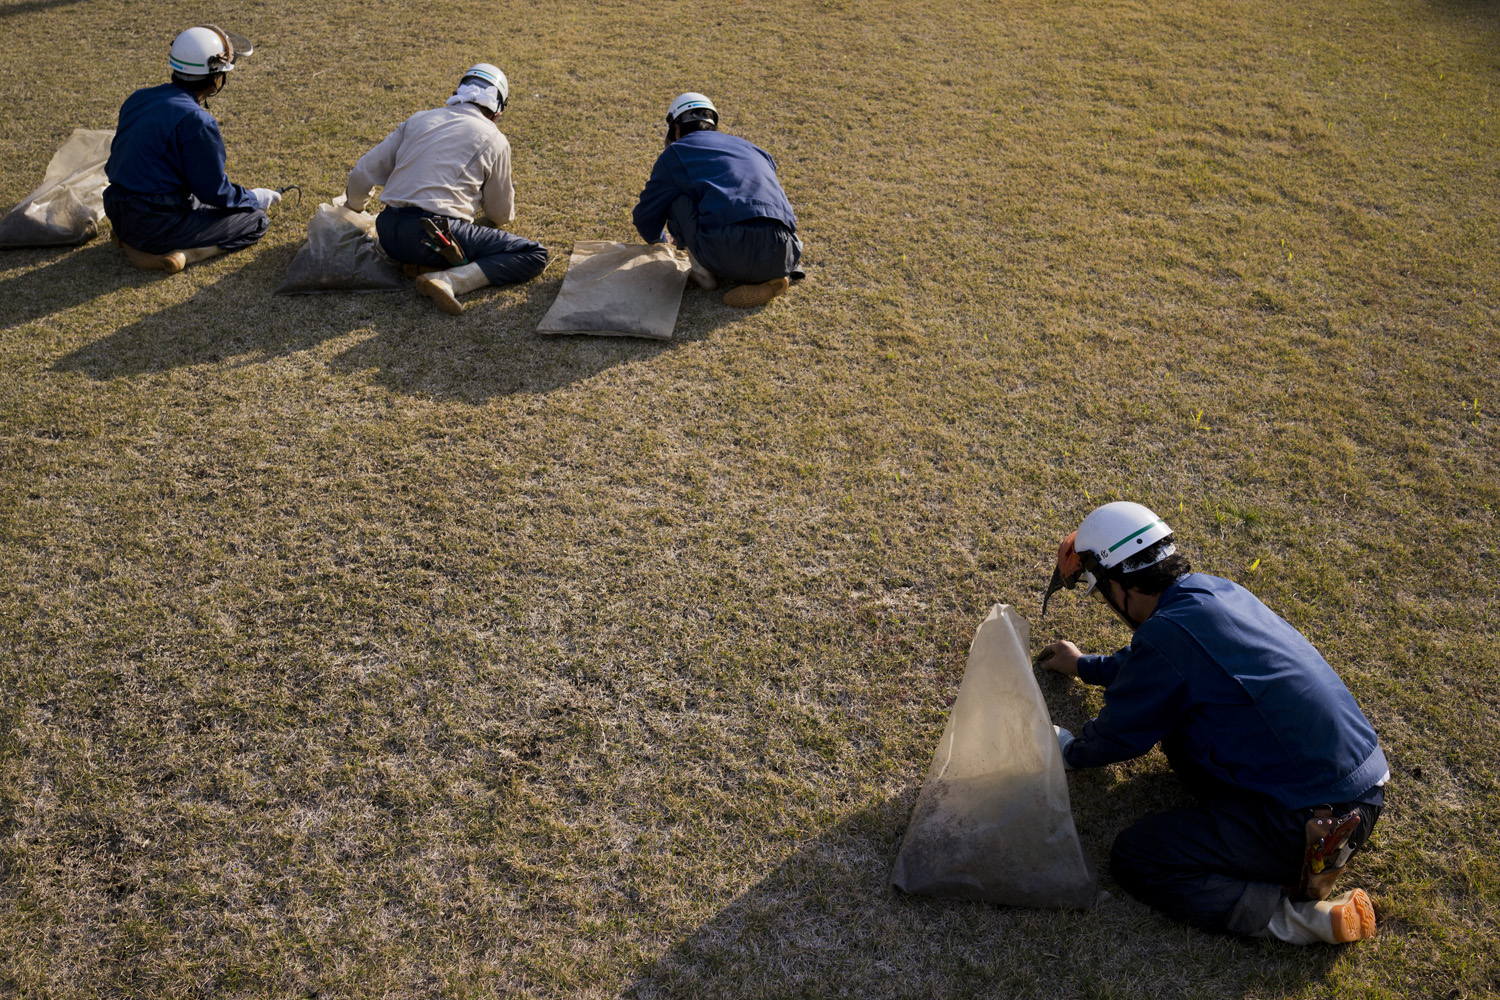 Japan, Ikata, 2014. Workers cut grass by hand at the Ikata Nuclear Power Station by Shikoku Electric Power Co., located on the southern coastline of Japan.